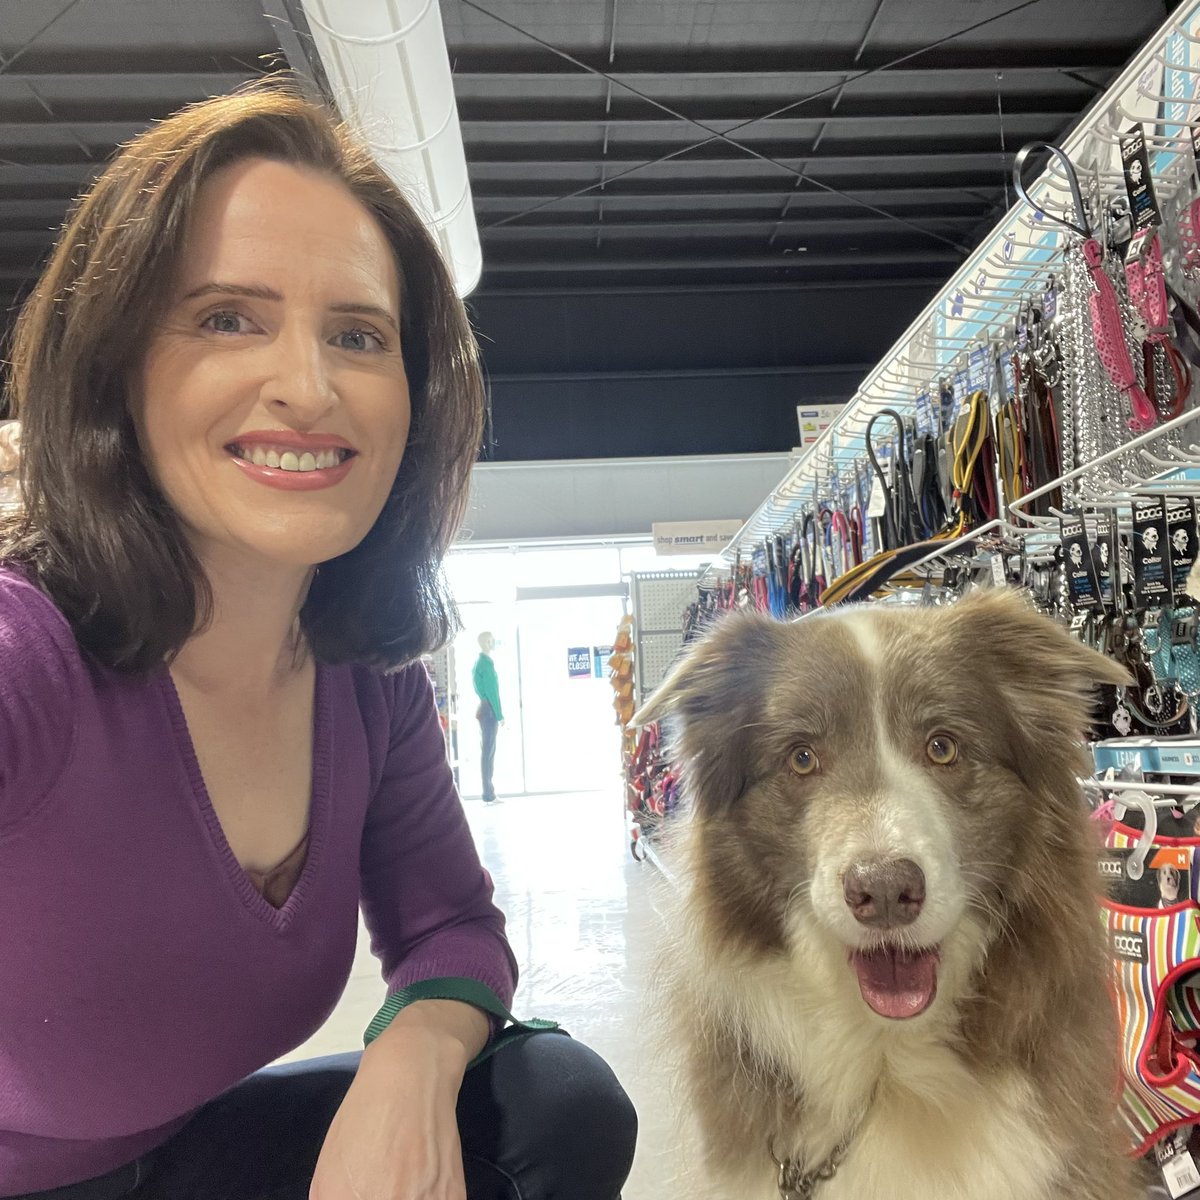 Panda was long overdue for a new leash and collar, so we checked out the new Petstock at Big Fish Junction on the weekend.

Panda was very happy with how many other doggo shoppers he got to say hello to while we were there!